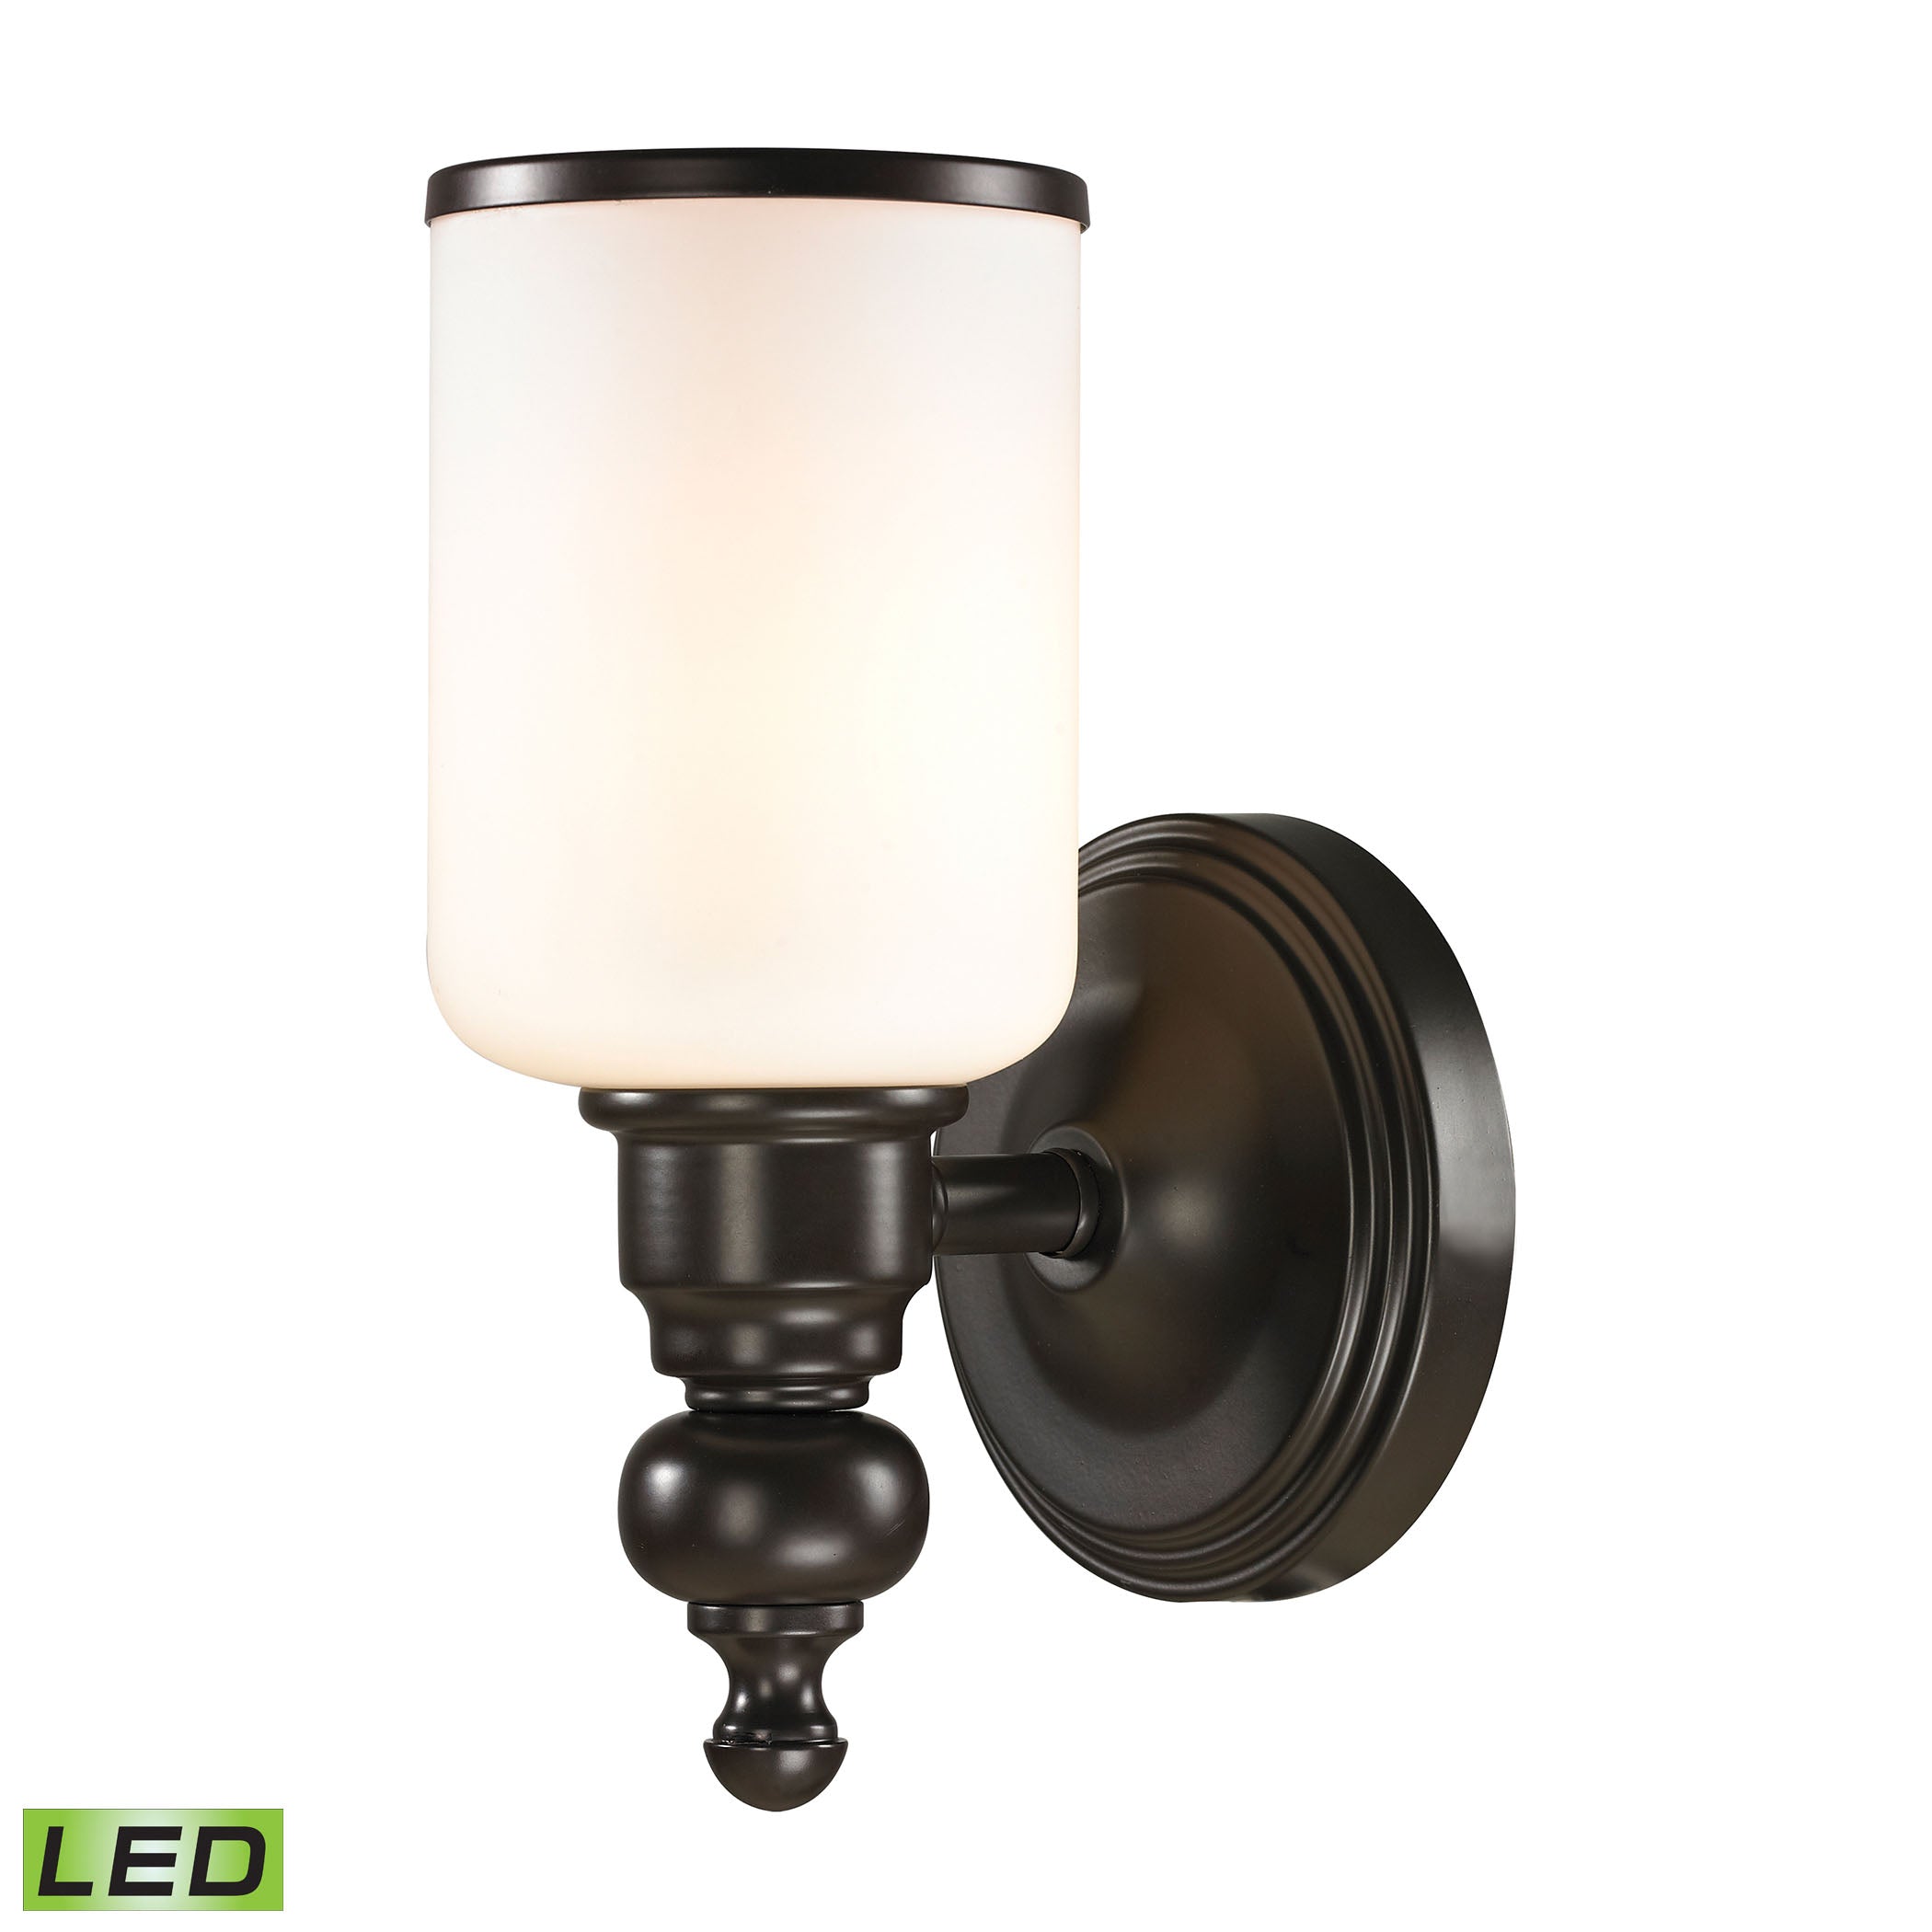 ELK Lighting 11590/1-LED Bristol 1-Light Vanity Lamp in Oil Rubbed Bronze with Opal White Blown Glass - Includes LED Bulb